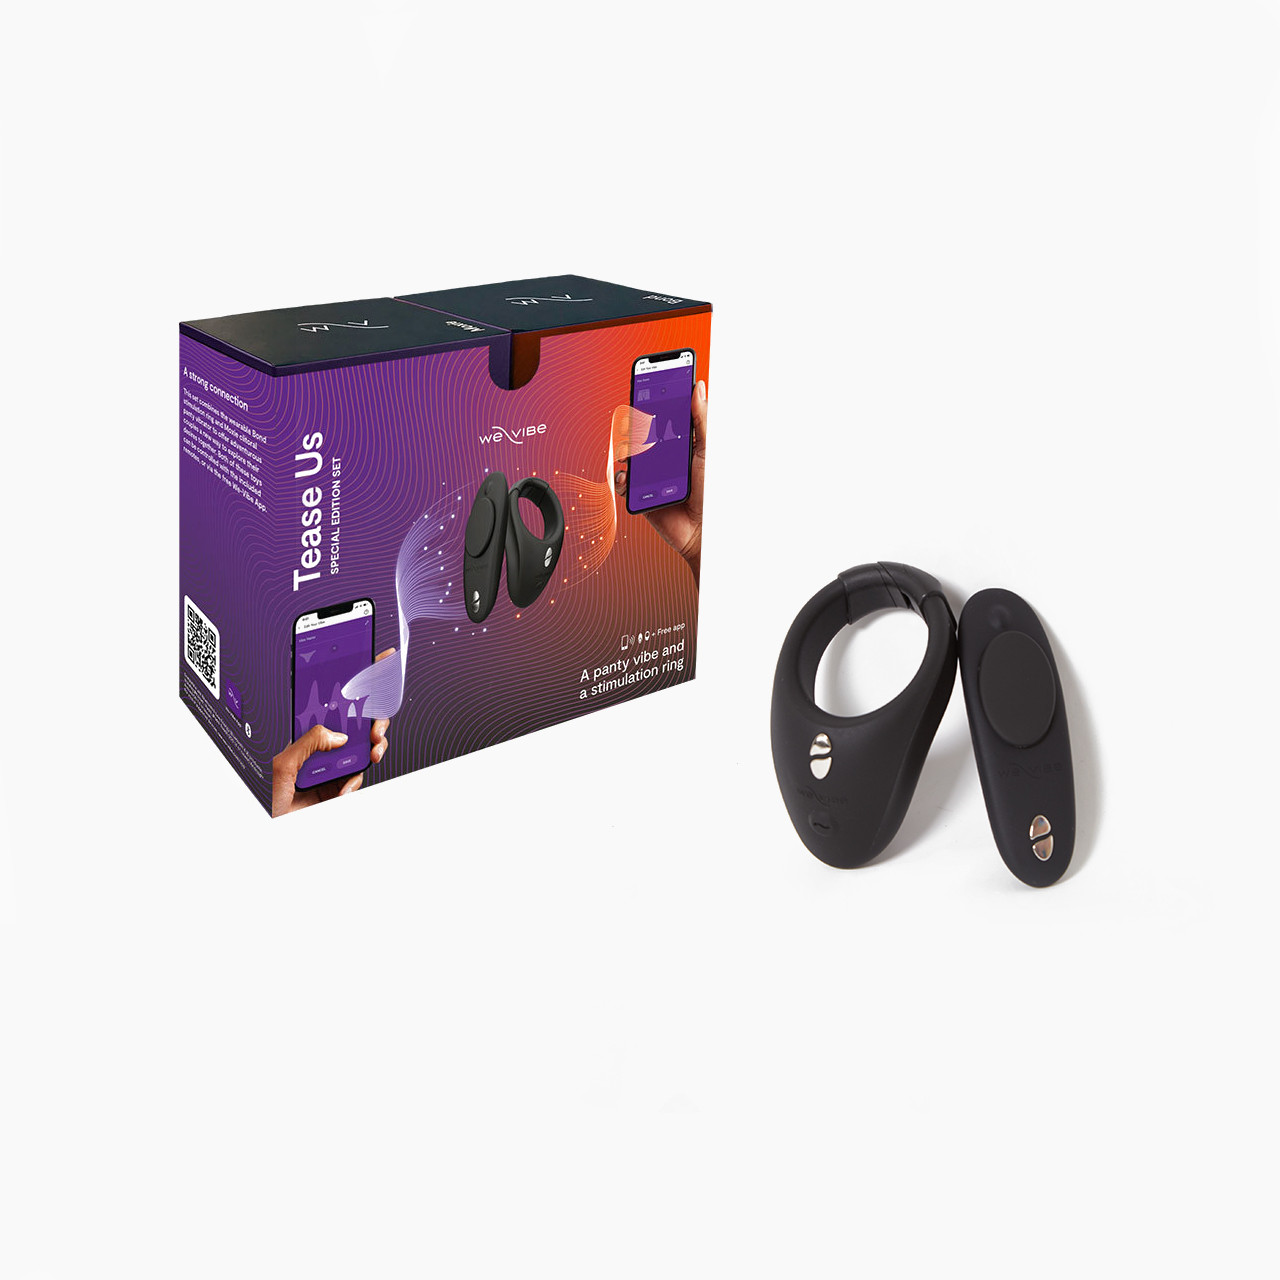 We Vibe Tease Us Sets with Moxie panty vibe and Bond vibrating cock ring